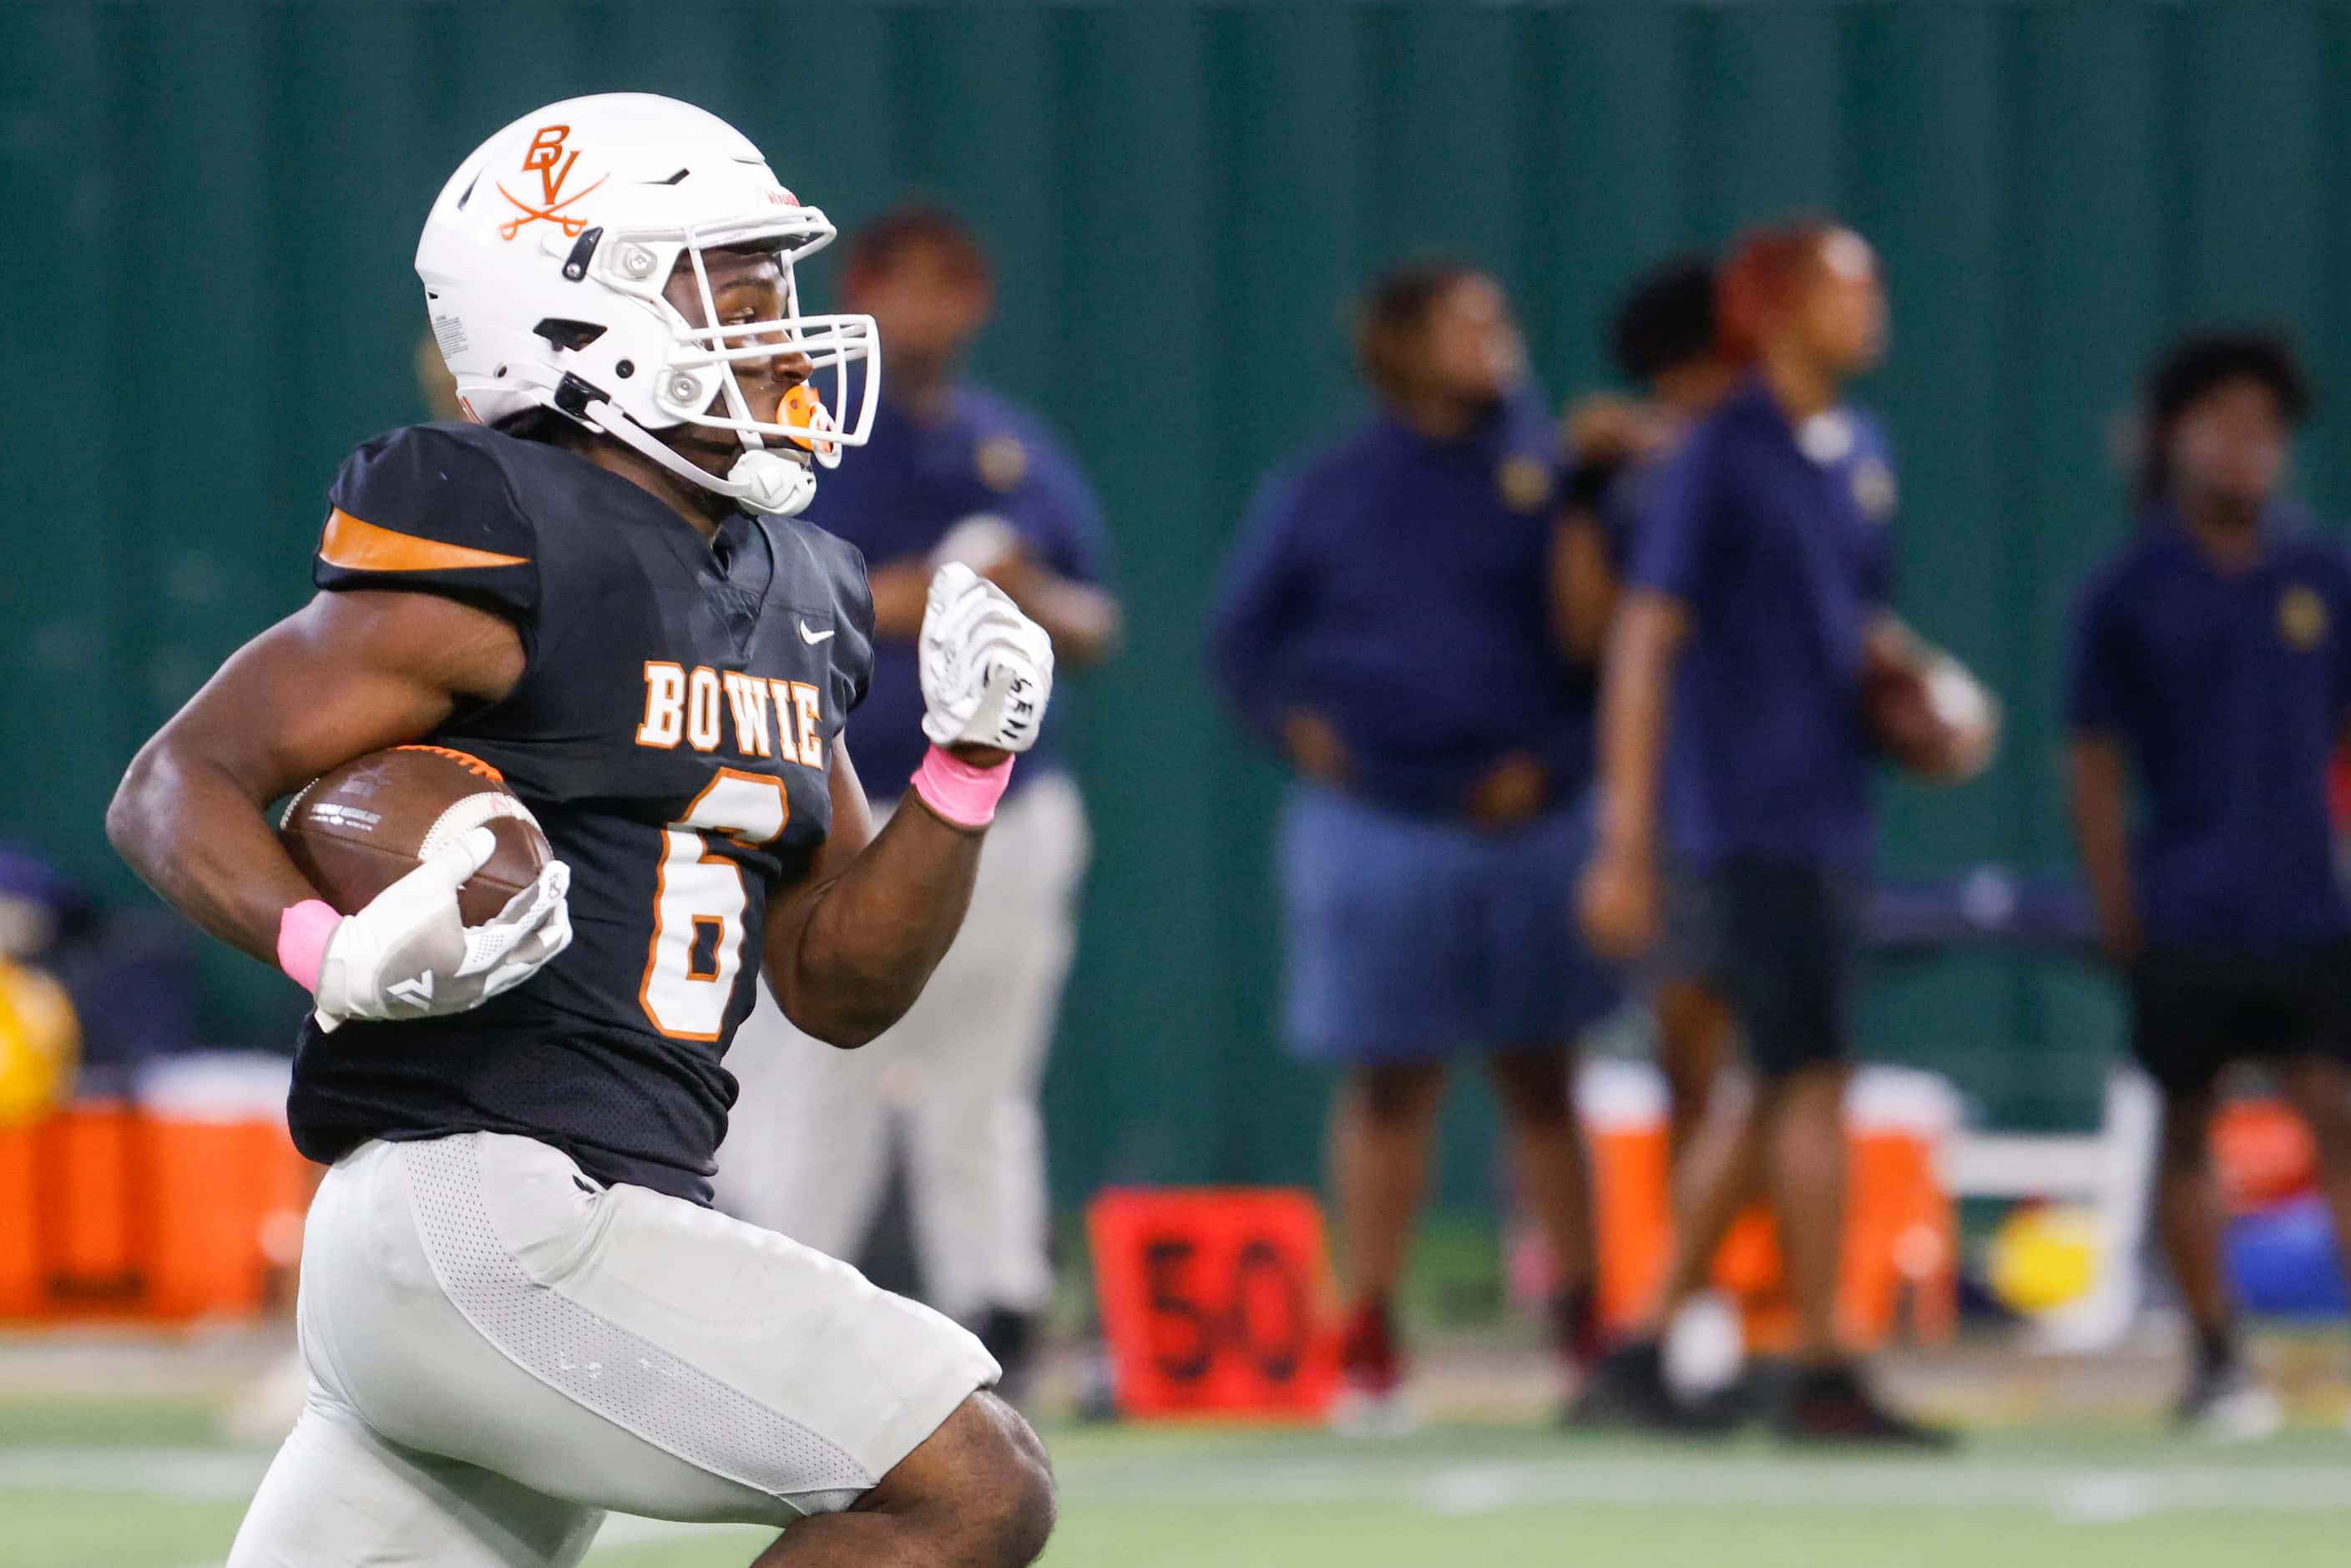 James Bowie High’s Darrion Bowers (front) runs for a touchdown during the first half of a...